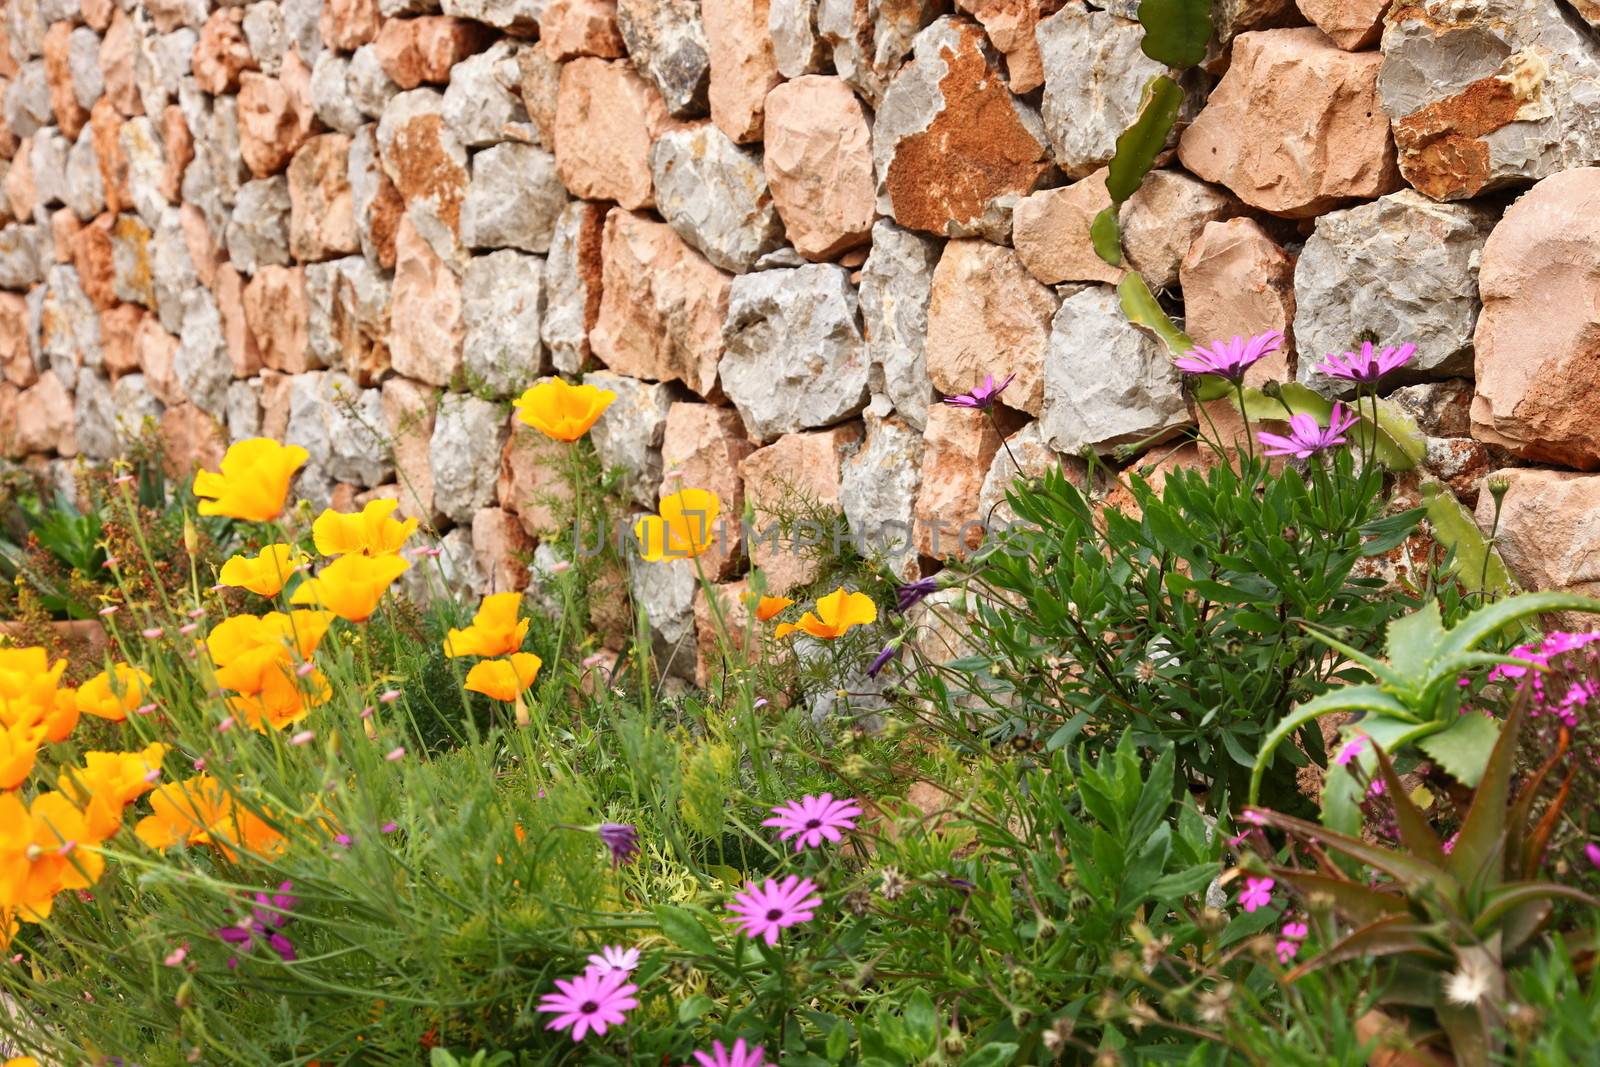 Detail of an old dry stone wall with pretty yellow and purple flowers growing at the base